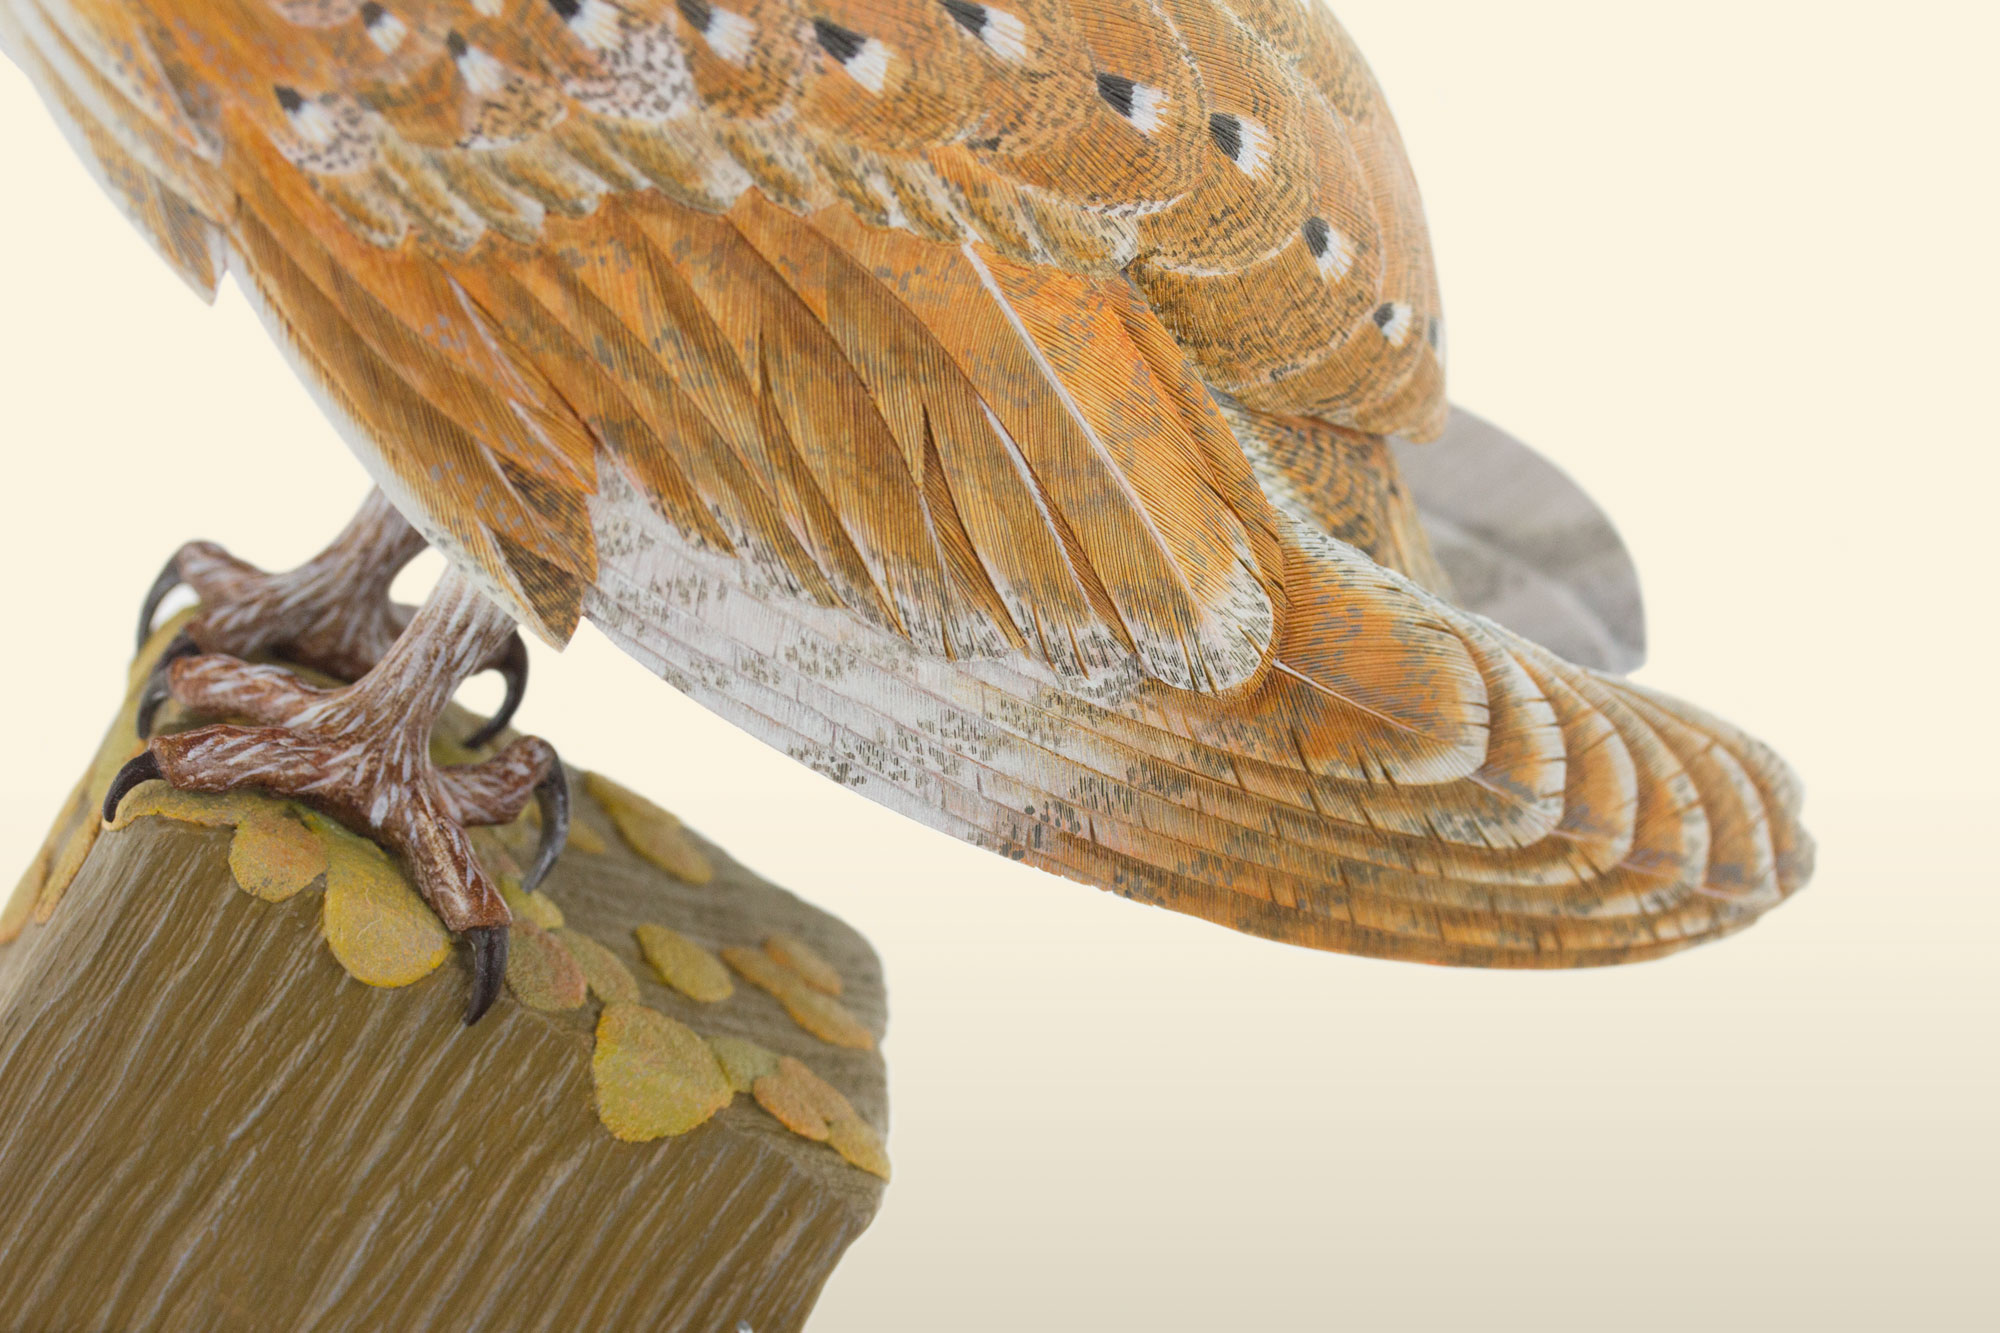 Barn owl bird carving, feather detail, by Feathercarver David Patrick-Brown